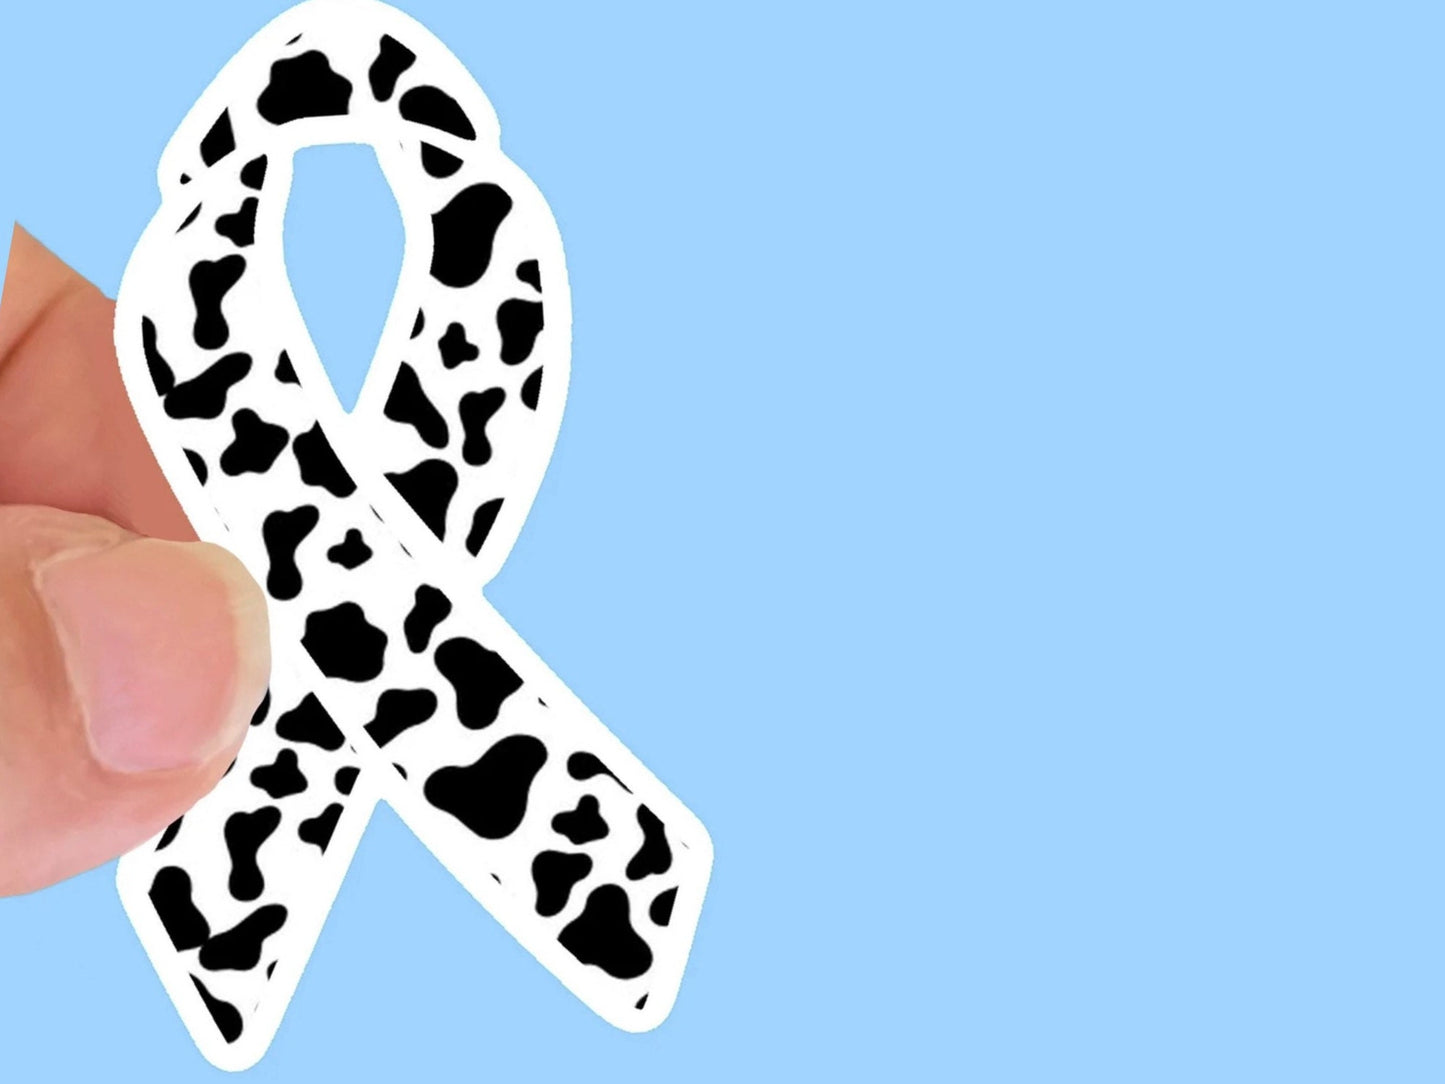 Omphalocele Cow Print Awareness Ribbon Vinyl Waterproof Sticker - Use for Water bottle, Laptop & other smooth surfaces